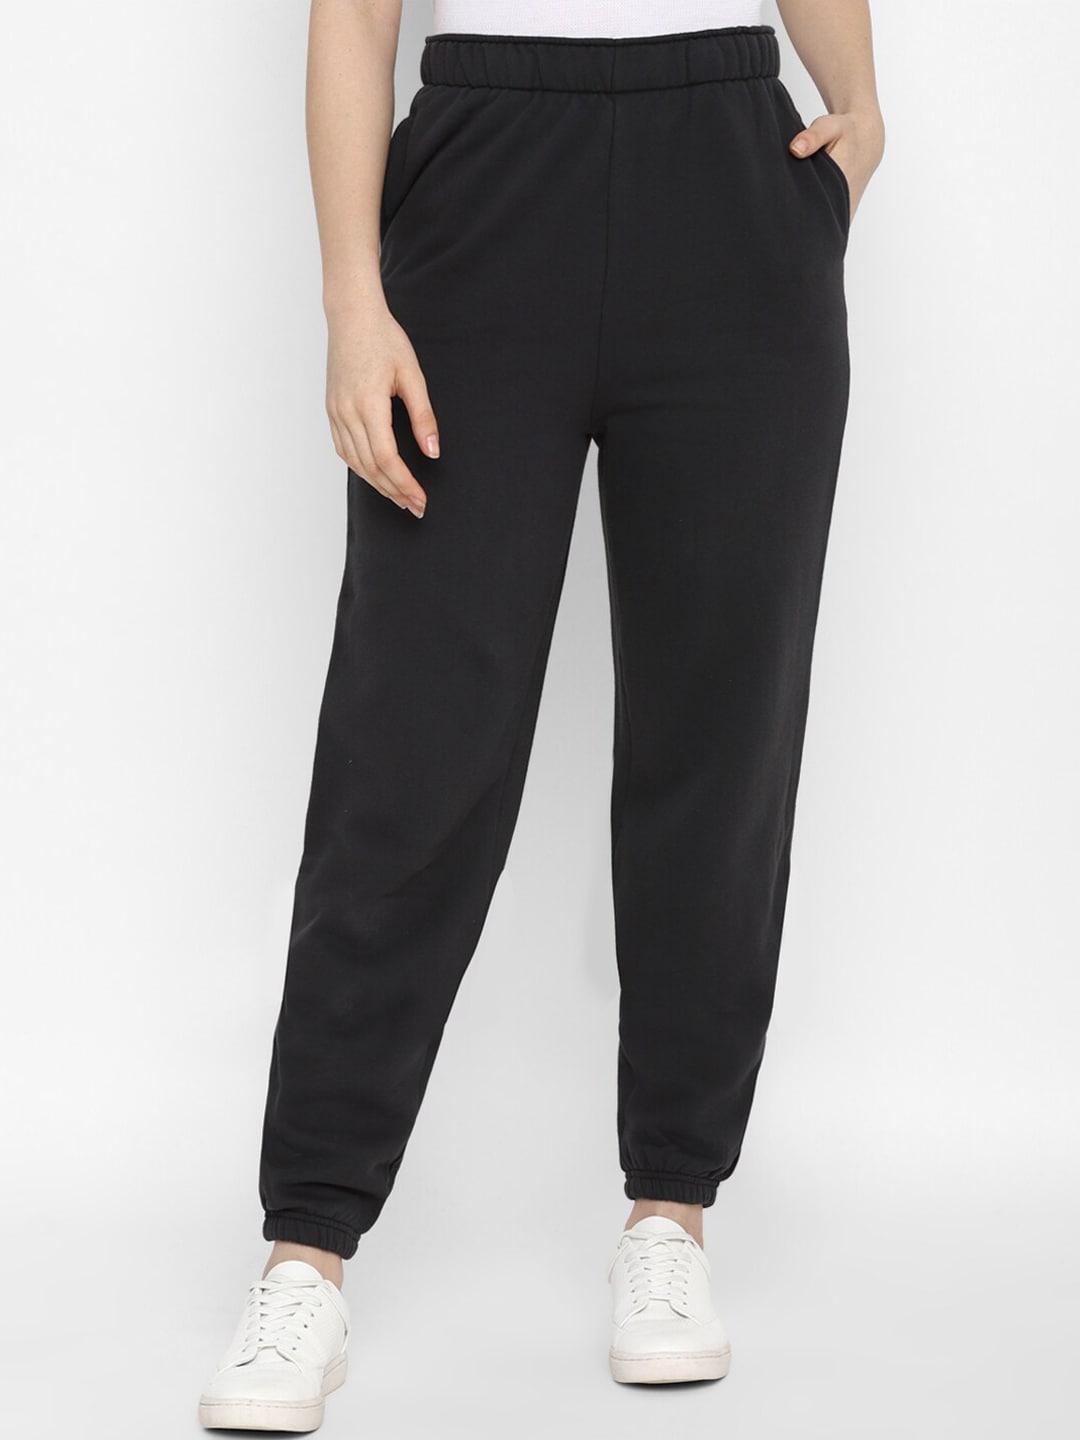 american-eagle-outfitters-women-black-solid-drawstring-joggers